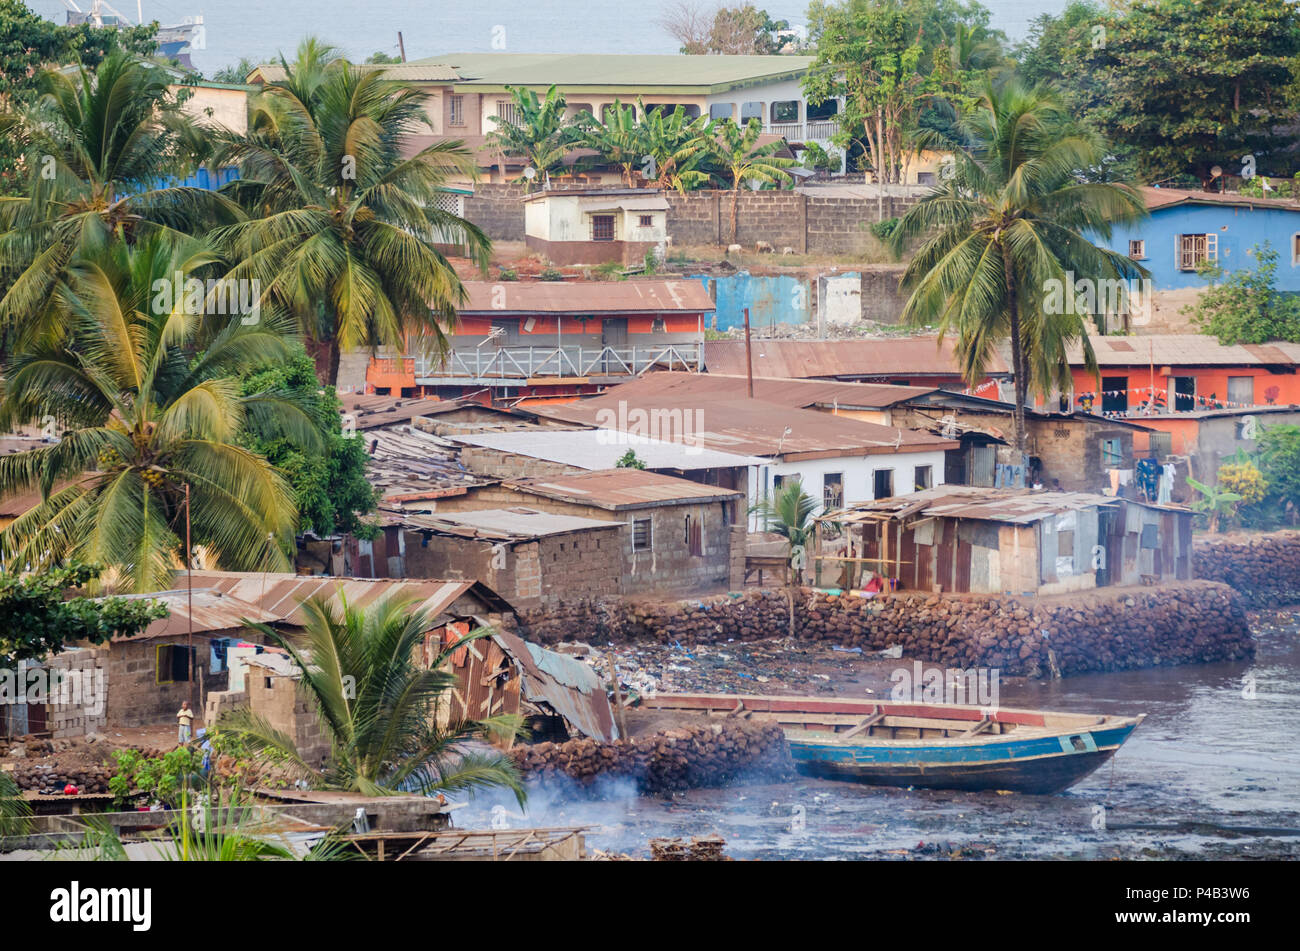 View over slums of Freetown at the sea where the poor inhabitants of this African capital city live, Sierra Leone, Africa. Stock Photo